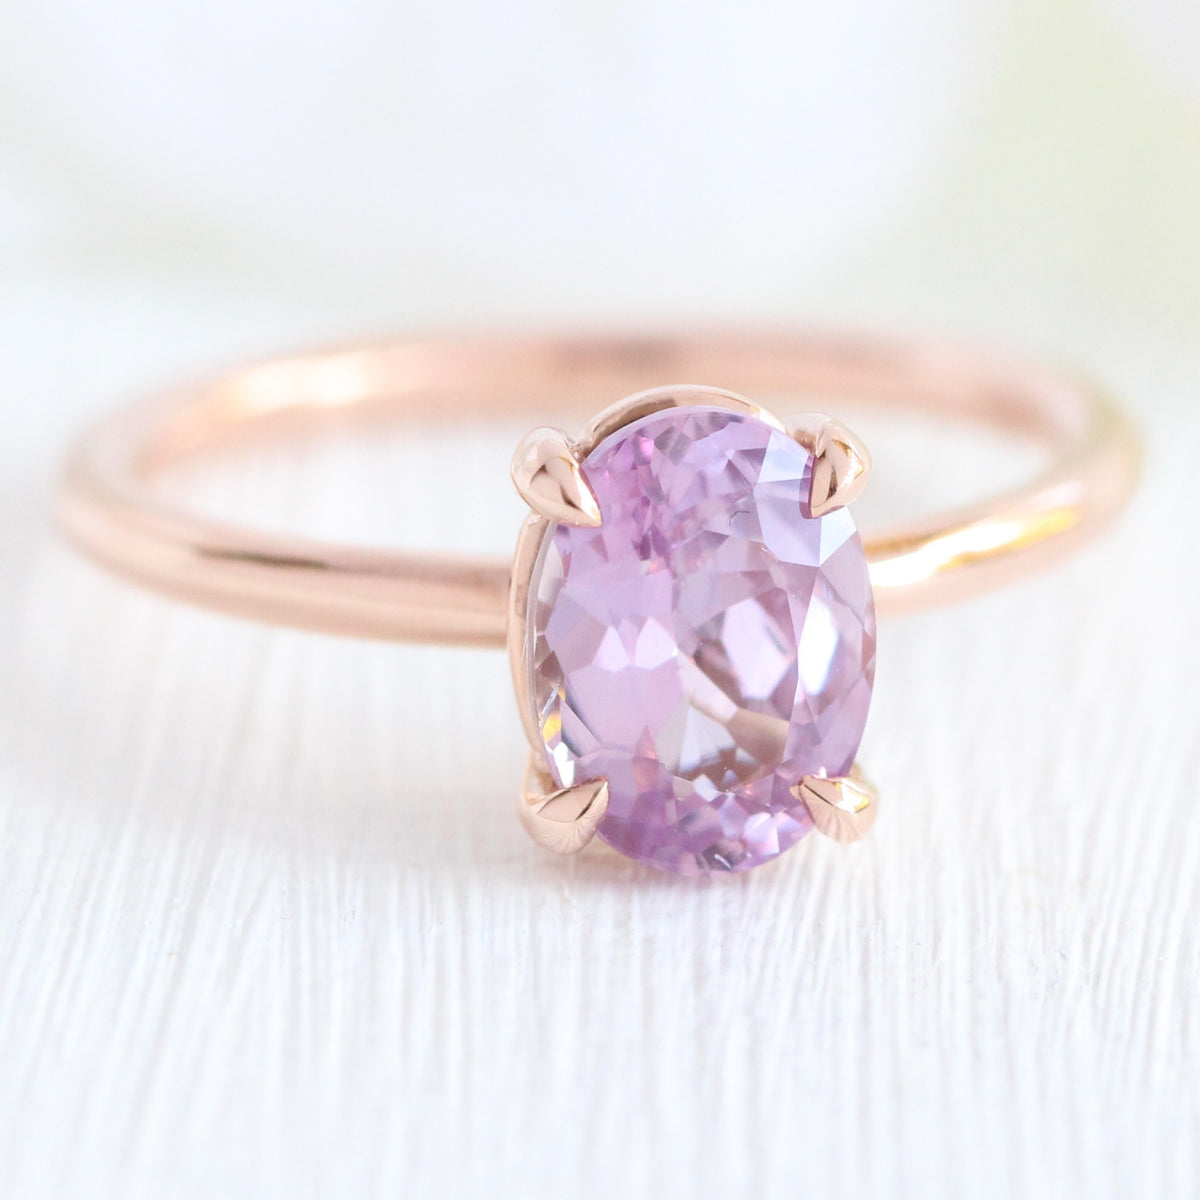 Lavender purple sapphire engagement ring rose gold low profile solitaire ring la more design jewelry